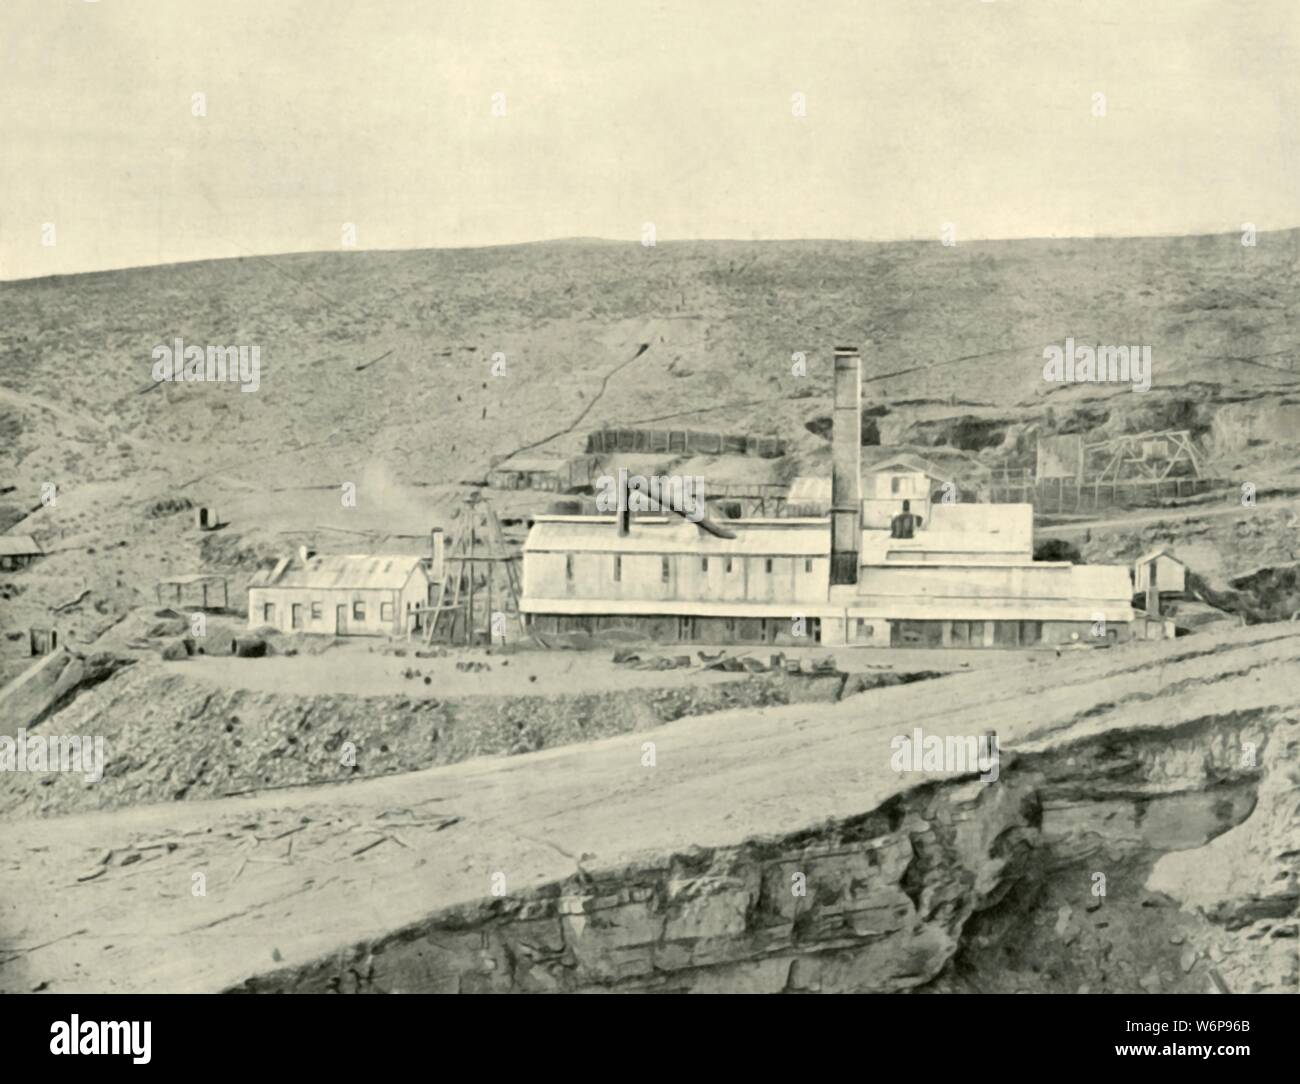 'The Silver King Mine, Sunny Corner, New South Wales', 1901.  Sunny Corner grew following the discovery of silver in the area in 1884. From &quot;Federated Australia&quot;. [The Werner Company, London, 1901] Stock Photo